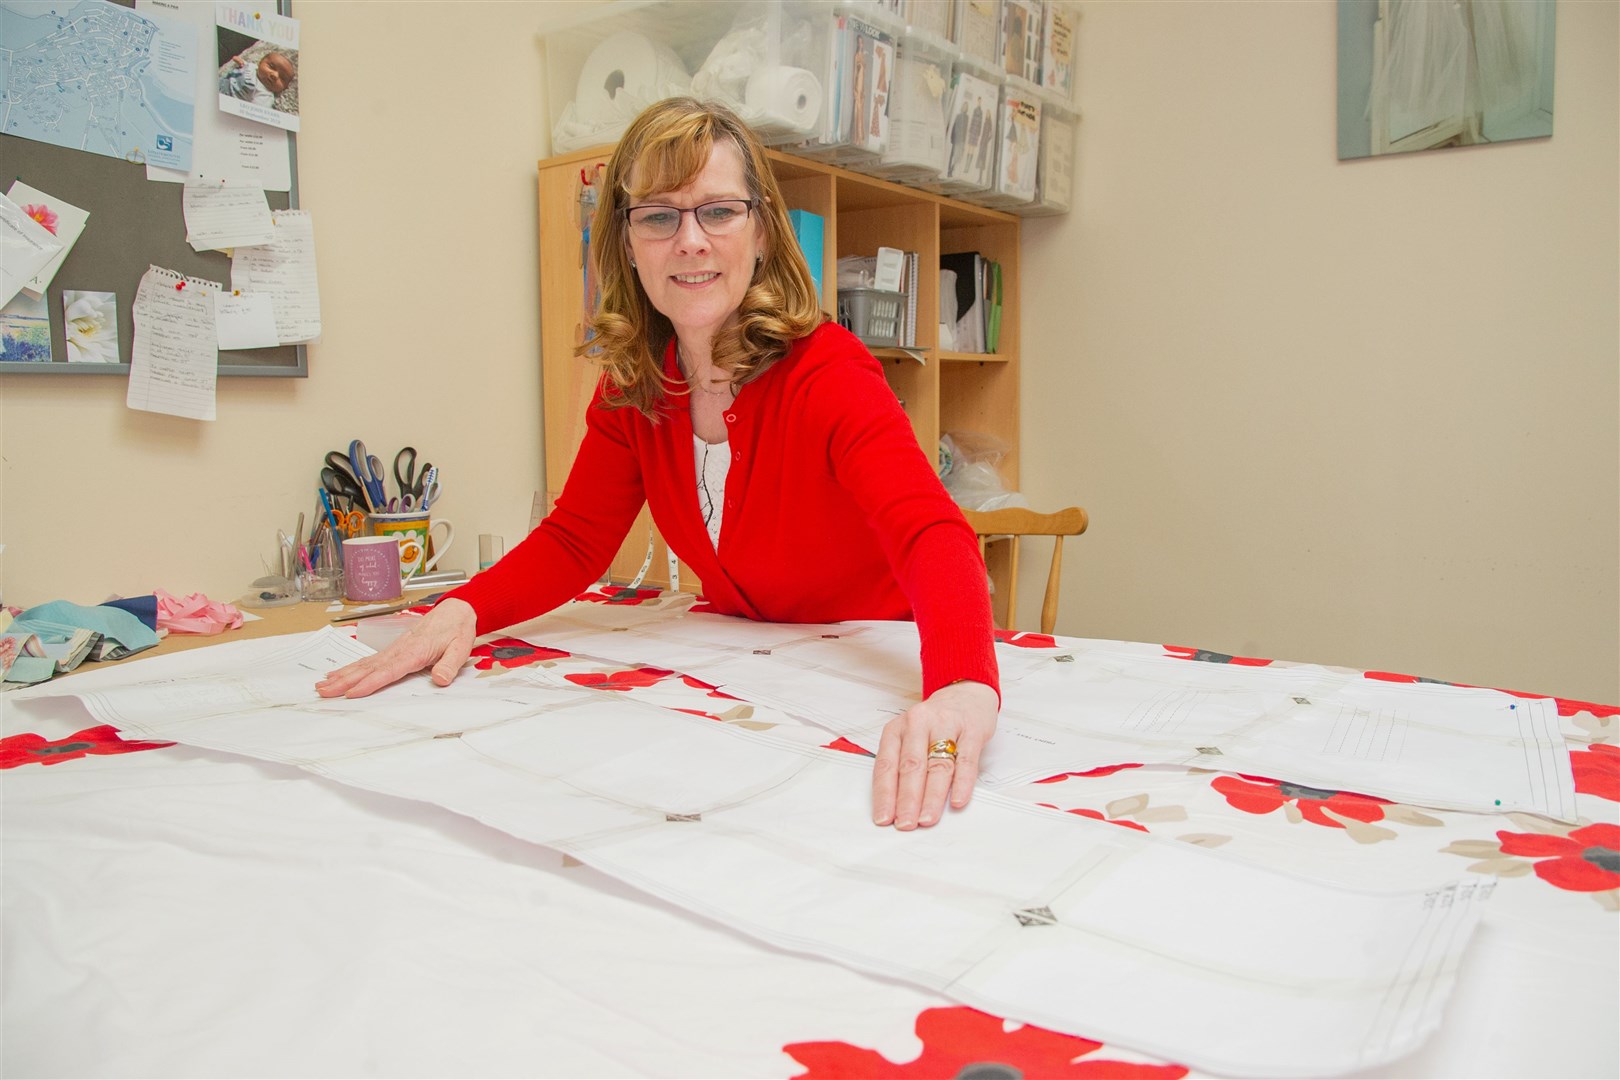 Maureen Halkett, owner of Unique Ladieswear in Lossiemouth, is co-leading a hardworking volunteer team as part of Moray Scrubs' co-ordinated effort. Picture: Daniel Forsyth.